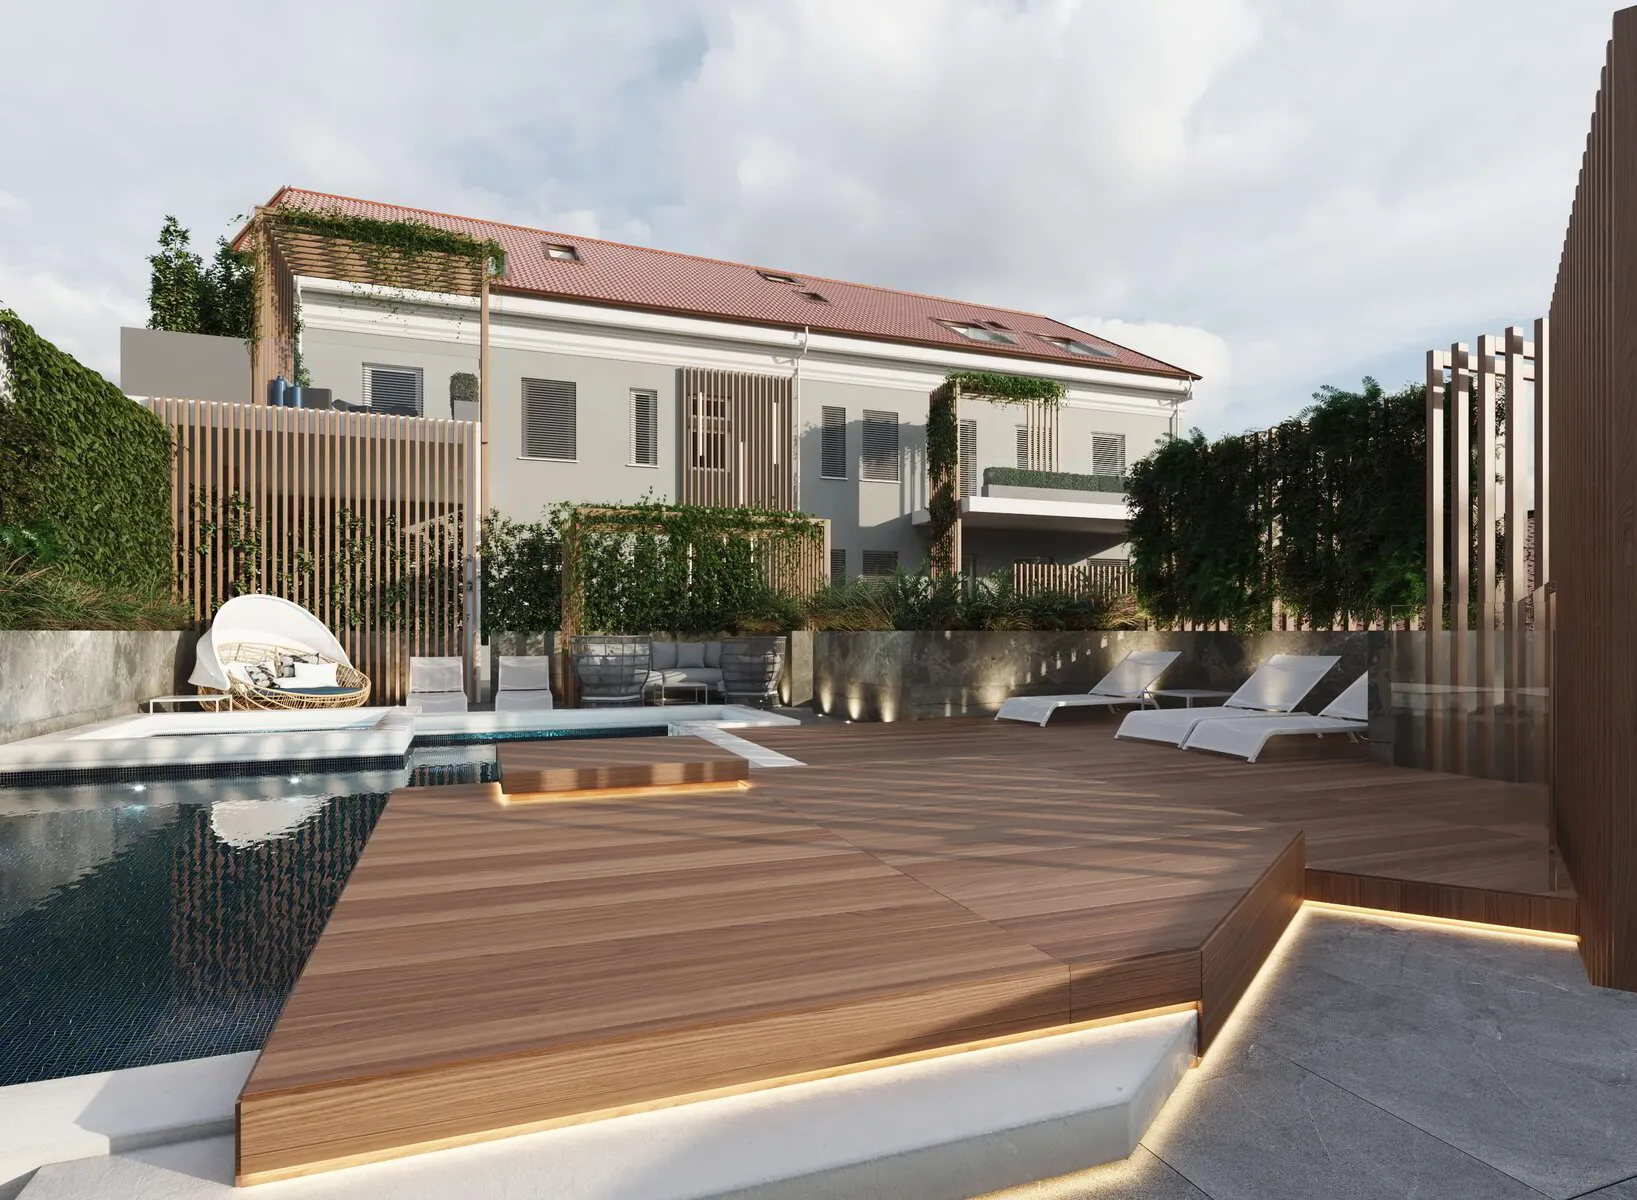 Residenza Solaria: new forms of dwelling